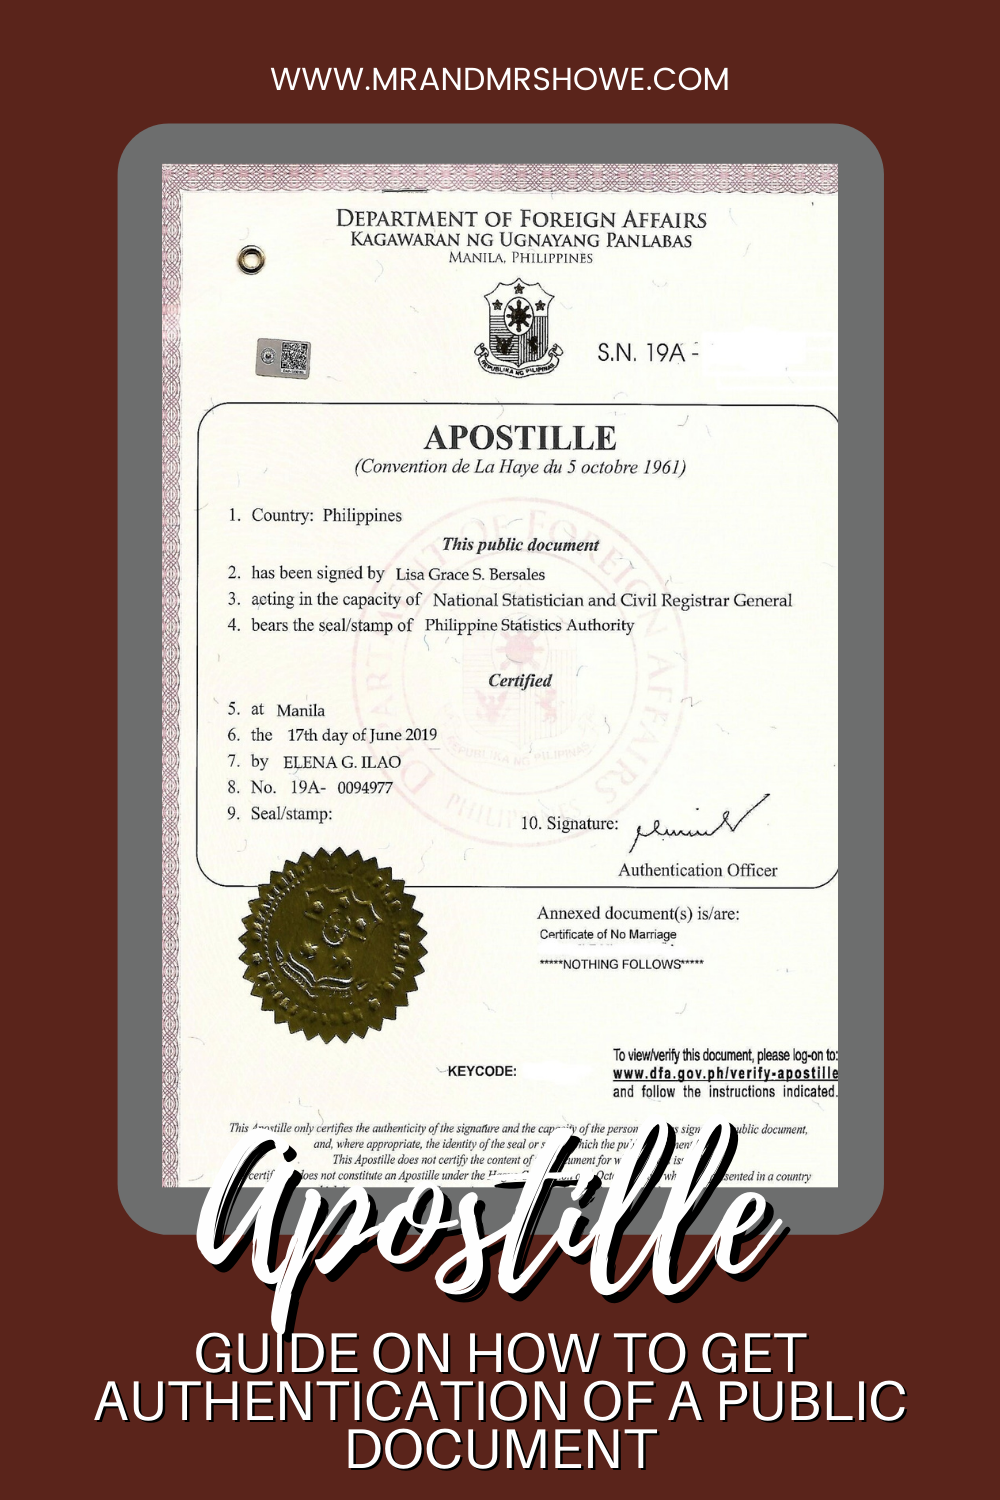 How To Get Authentication of a Public Document through Apostille in the Philippines2.png